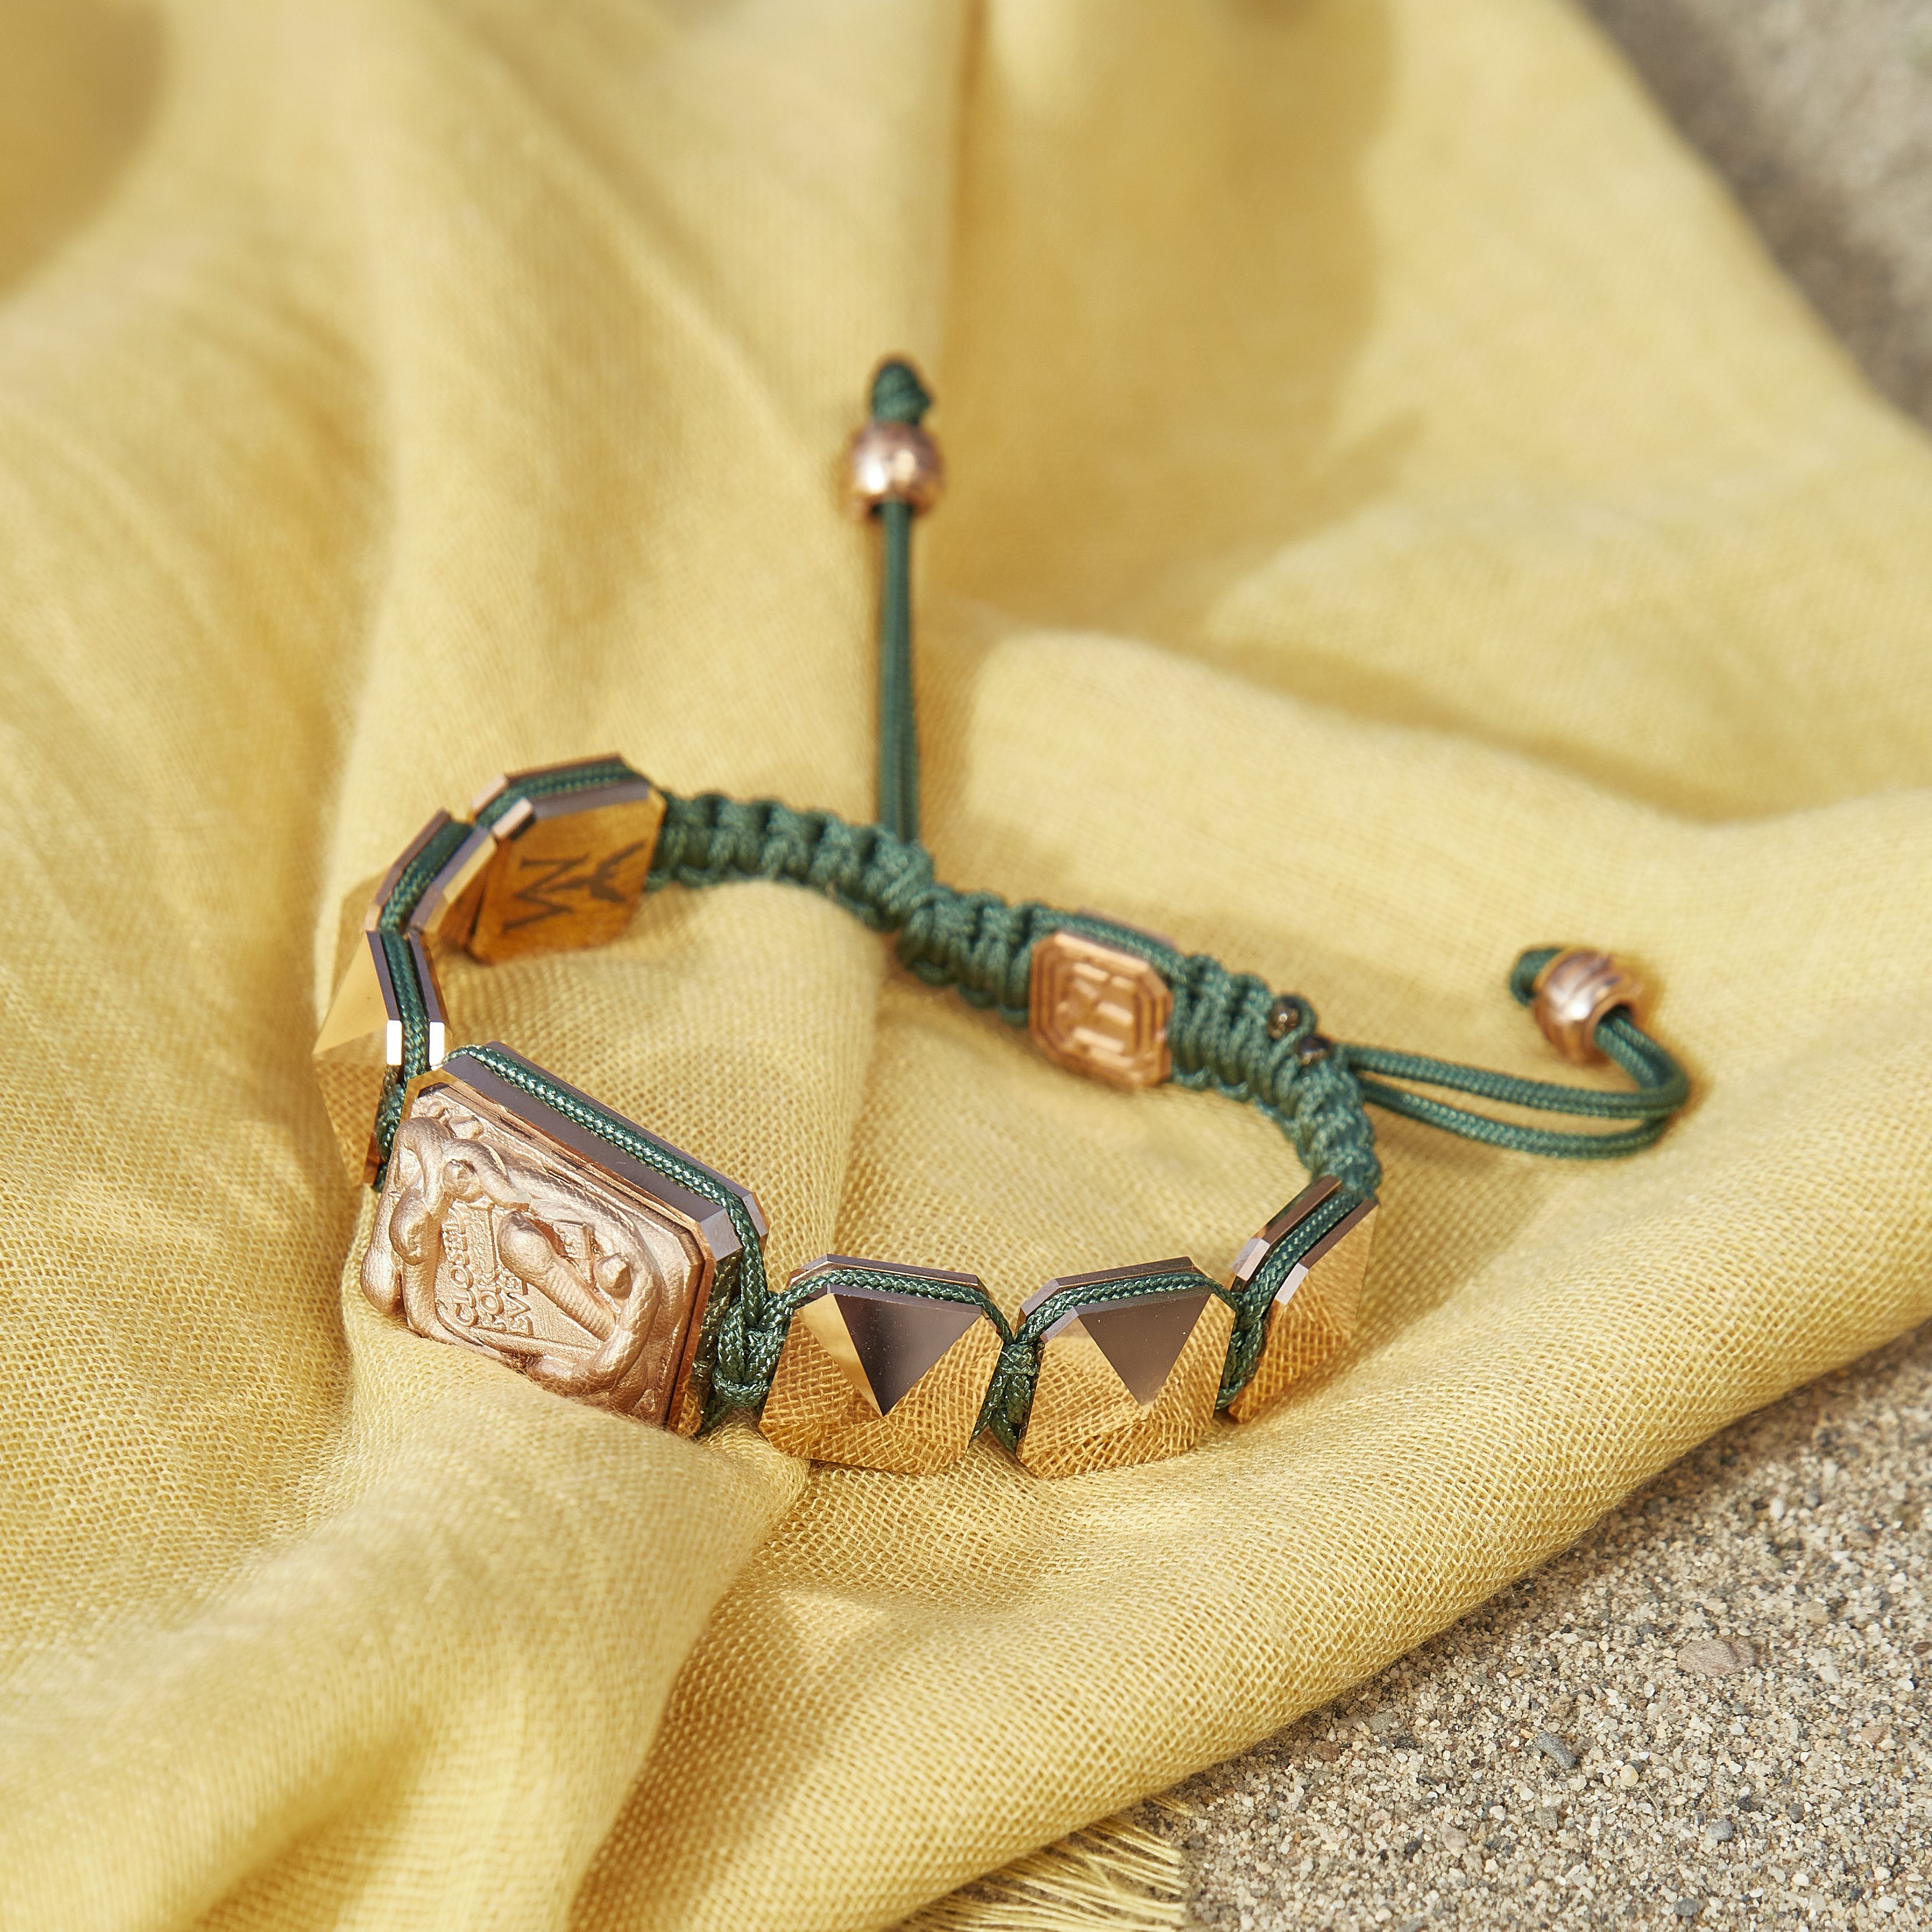 I Love My Baby bracelet with ceramic and sculpture finished in 18k Rose Gold complemented with a dark green coloured cord.